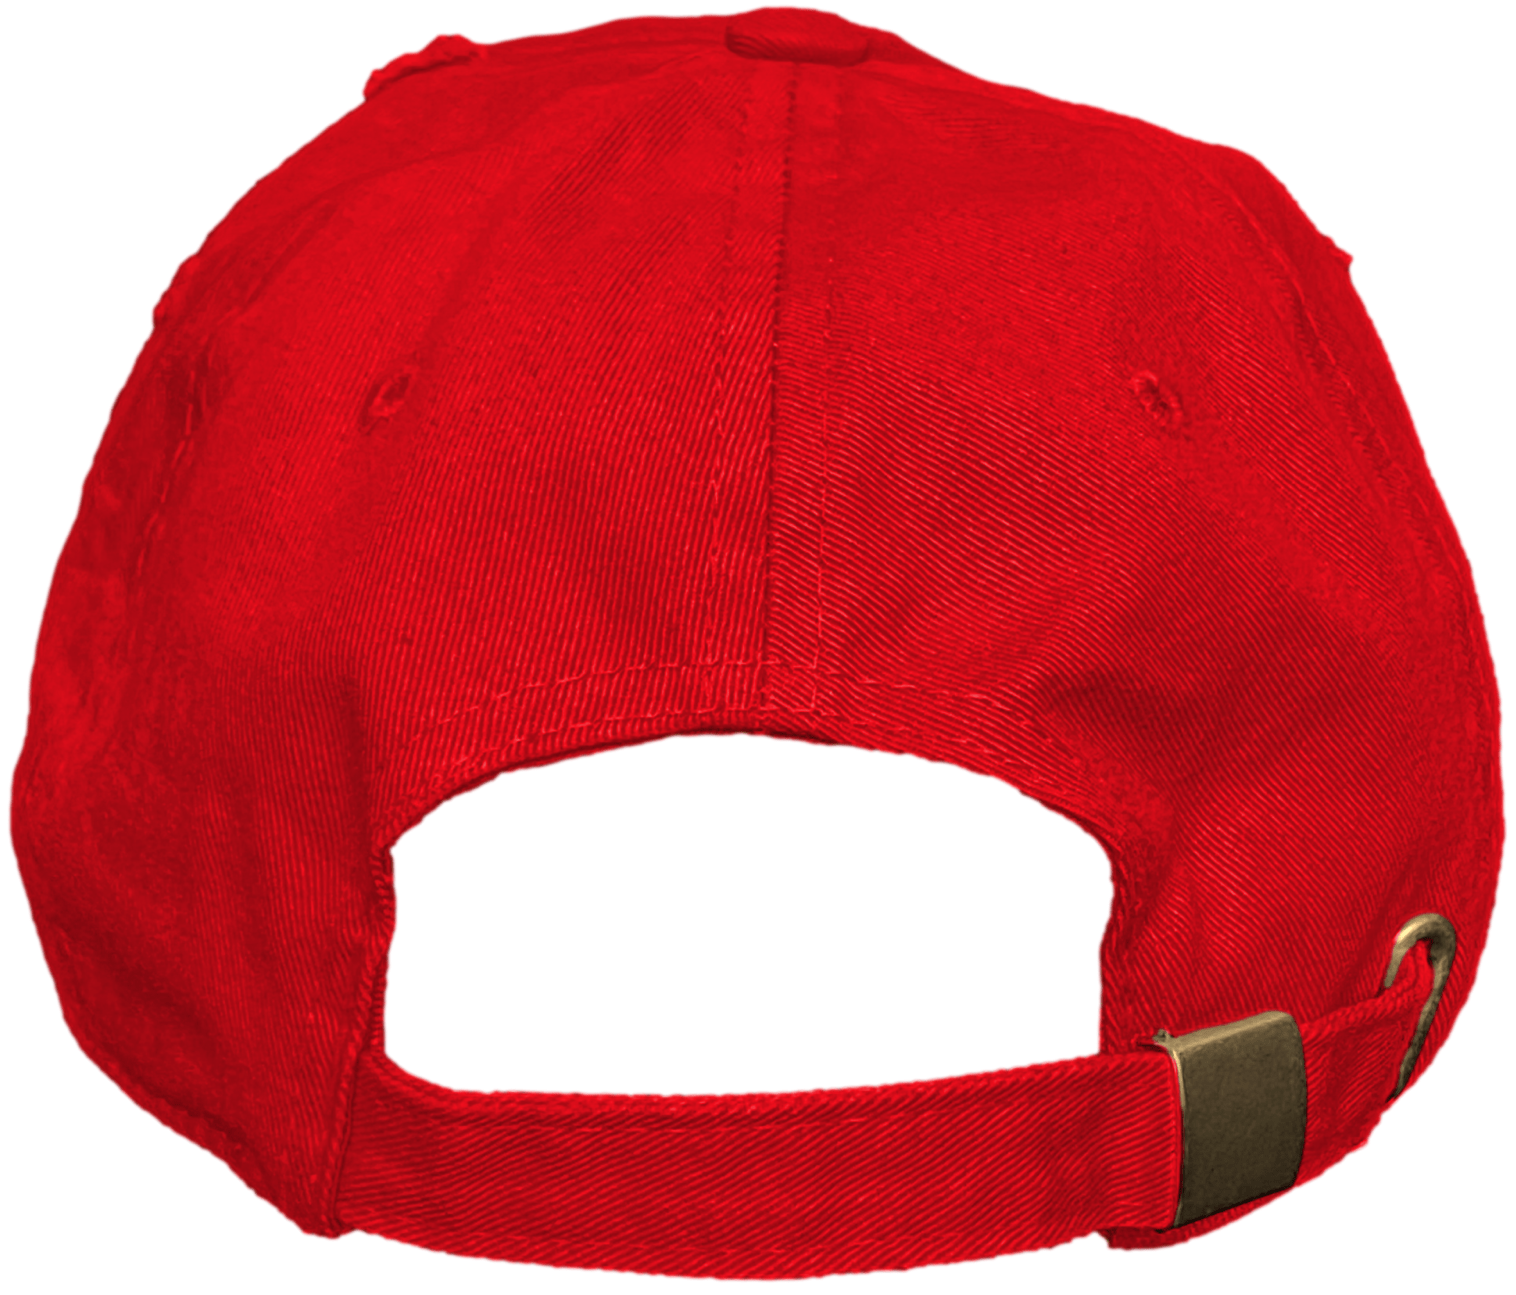 Red Taxi 12s Dad Hat - Jordan 12 Red Taxi Hats - Red Money Talks